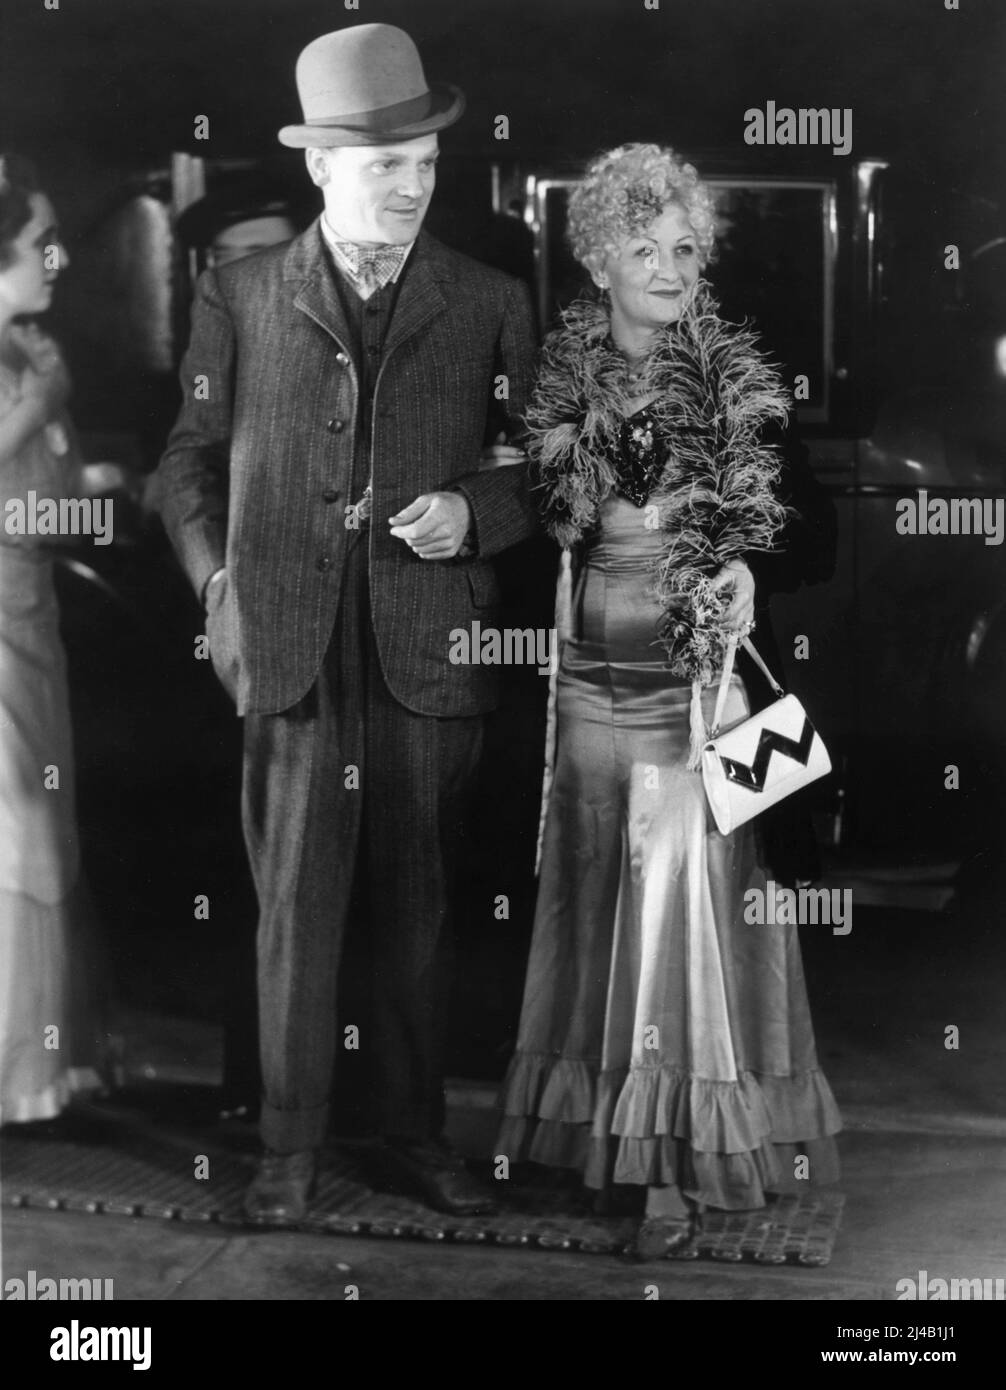 JAMES CAGNEY and his wife BILLIE / FRANCES CAGNEY arriving in fancy dress for Party with a Gay Nineties Theme given by Darryl F. Zanuck after the premiere in Hollywood of his film THE BOWERY in October 1933 Stock Photo